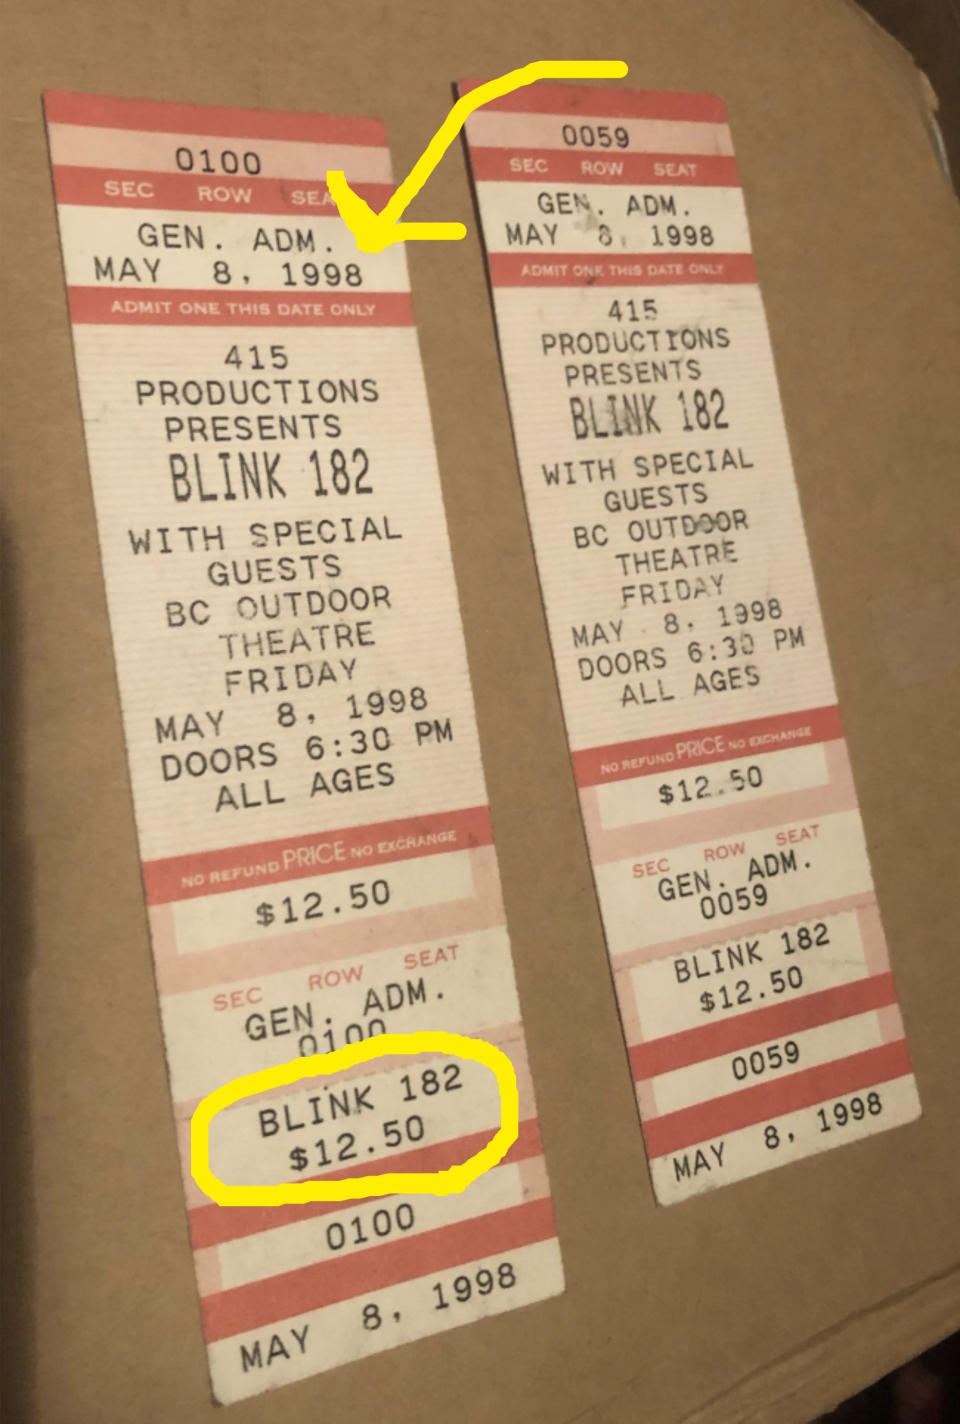 Two general admission tickets for a Blink 182 concert with BC Outdoor Theatre, 415 Productions on May 8, 1998, $12.50 each, all ages